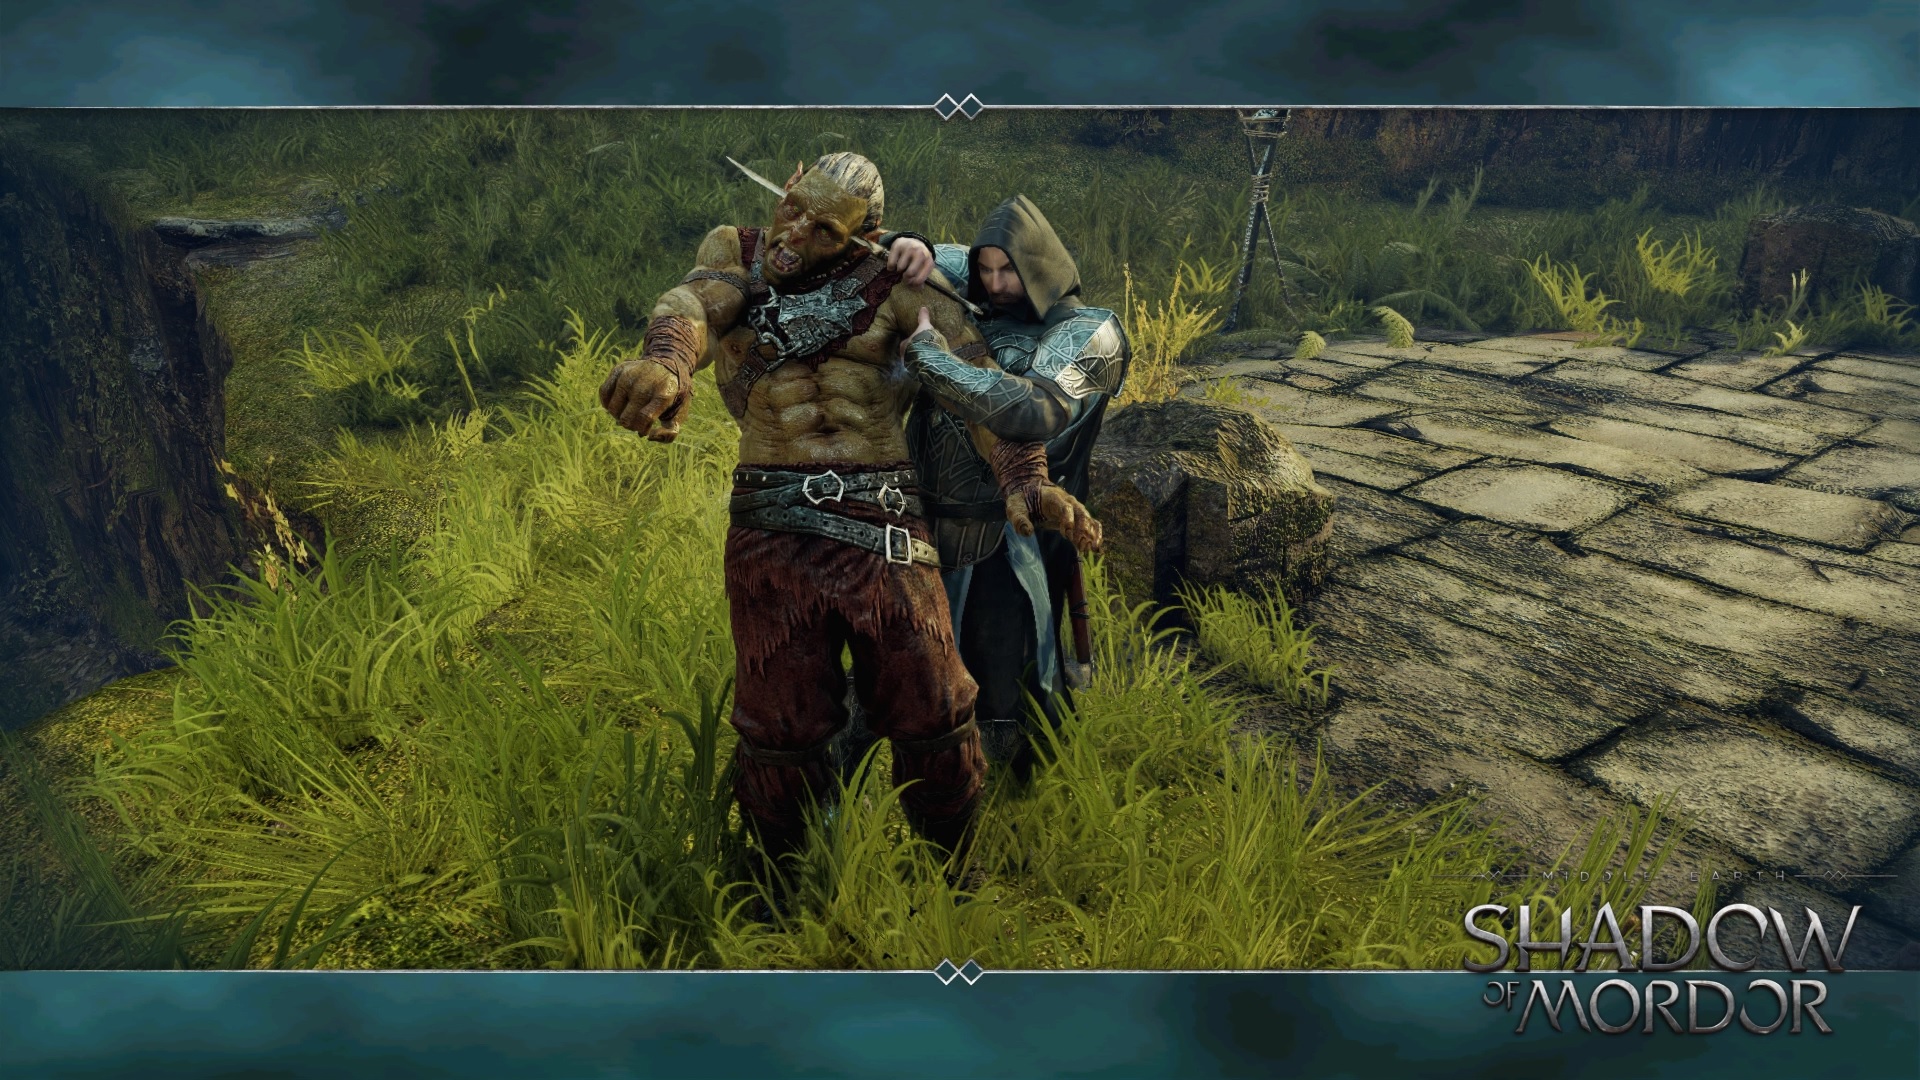 General 1920x1080 Middle-Earth Middle-earth: Shadow of Mordor video games video game characters